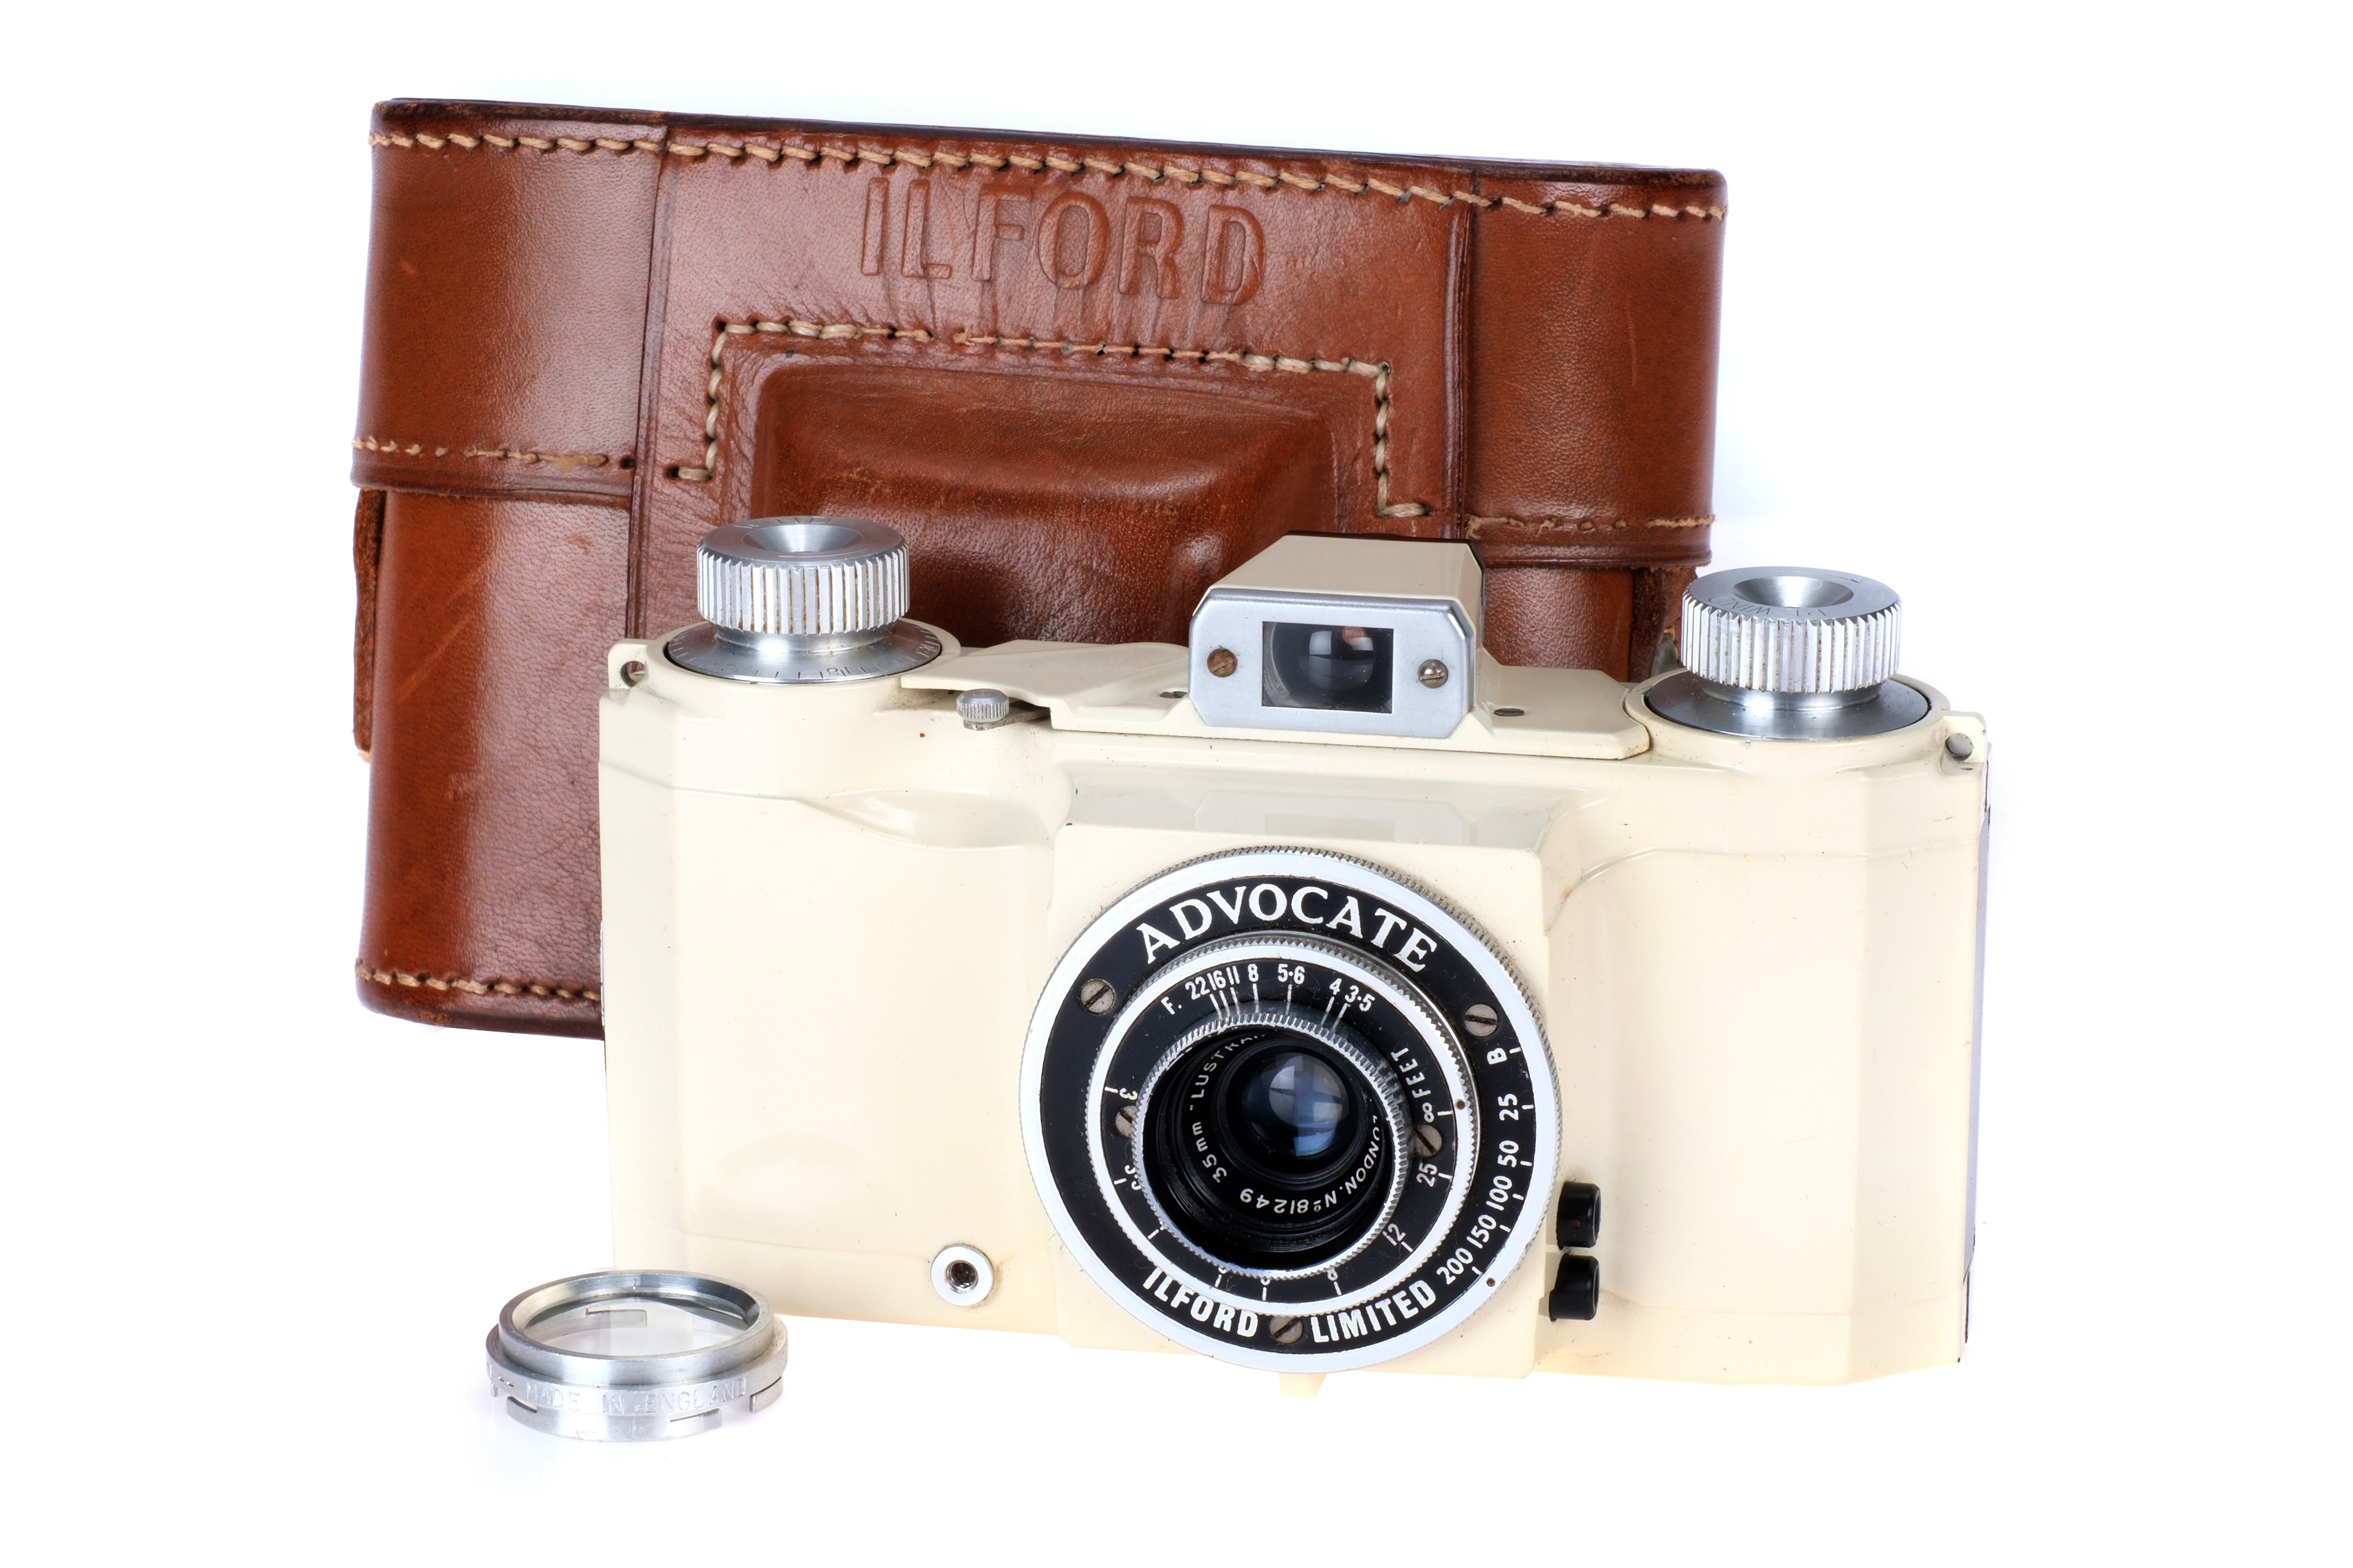 An Ilford Adcovate Viewfinder Camera,